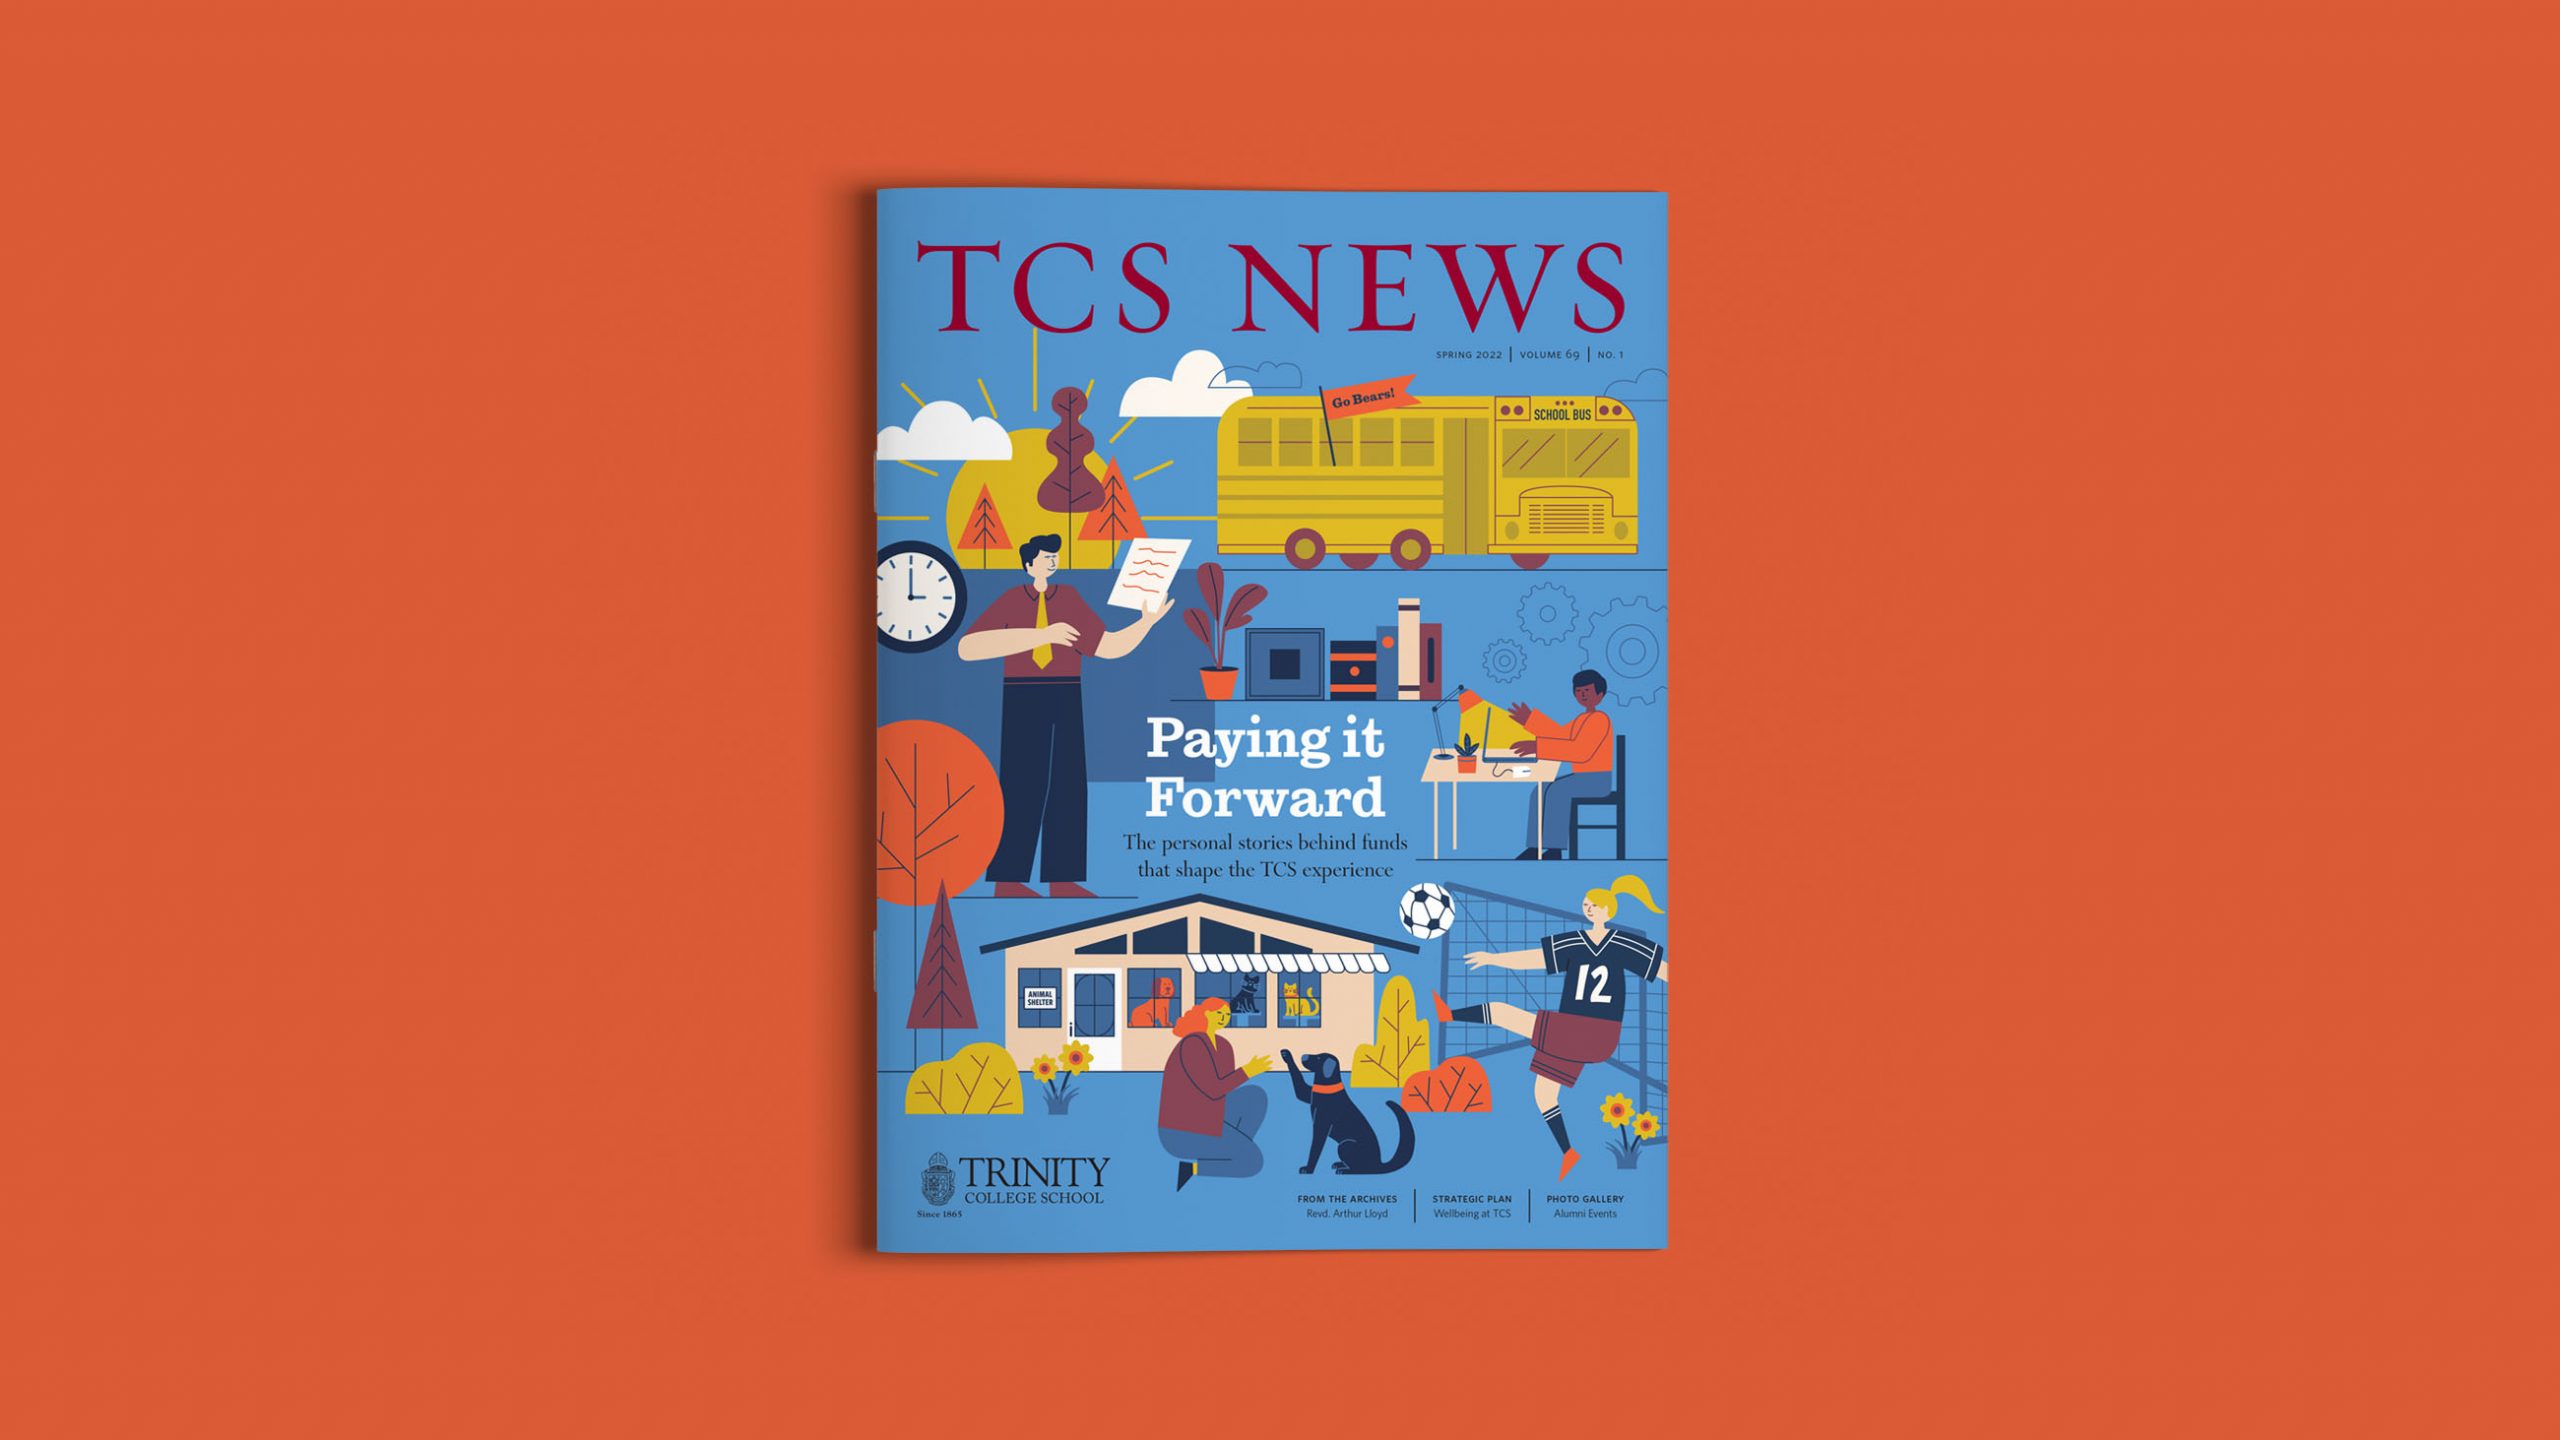 The TCS News cover.